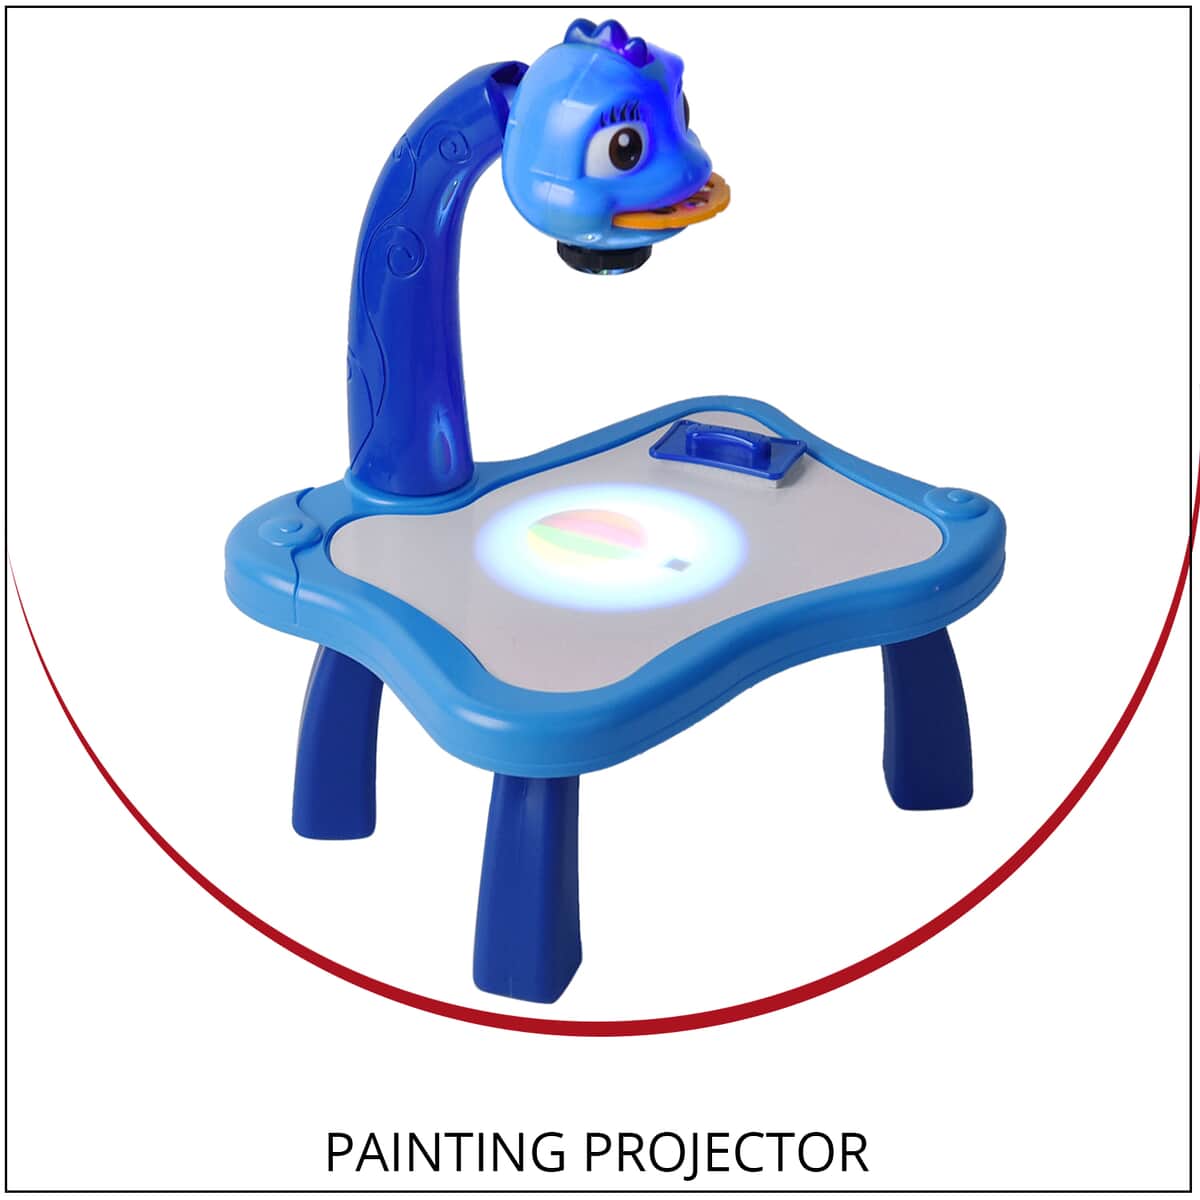 Value Pay Blue Painting Projector (Including: 1 Painting Board, 3 Lantern Slides, 12 Water Pen, 1 Book, and 1 Clean Brush) image number 1